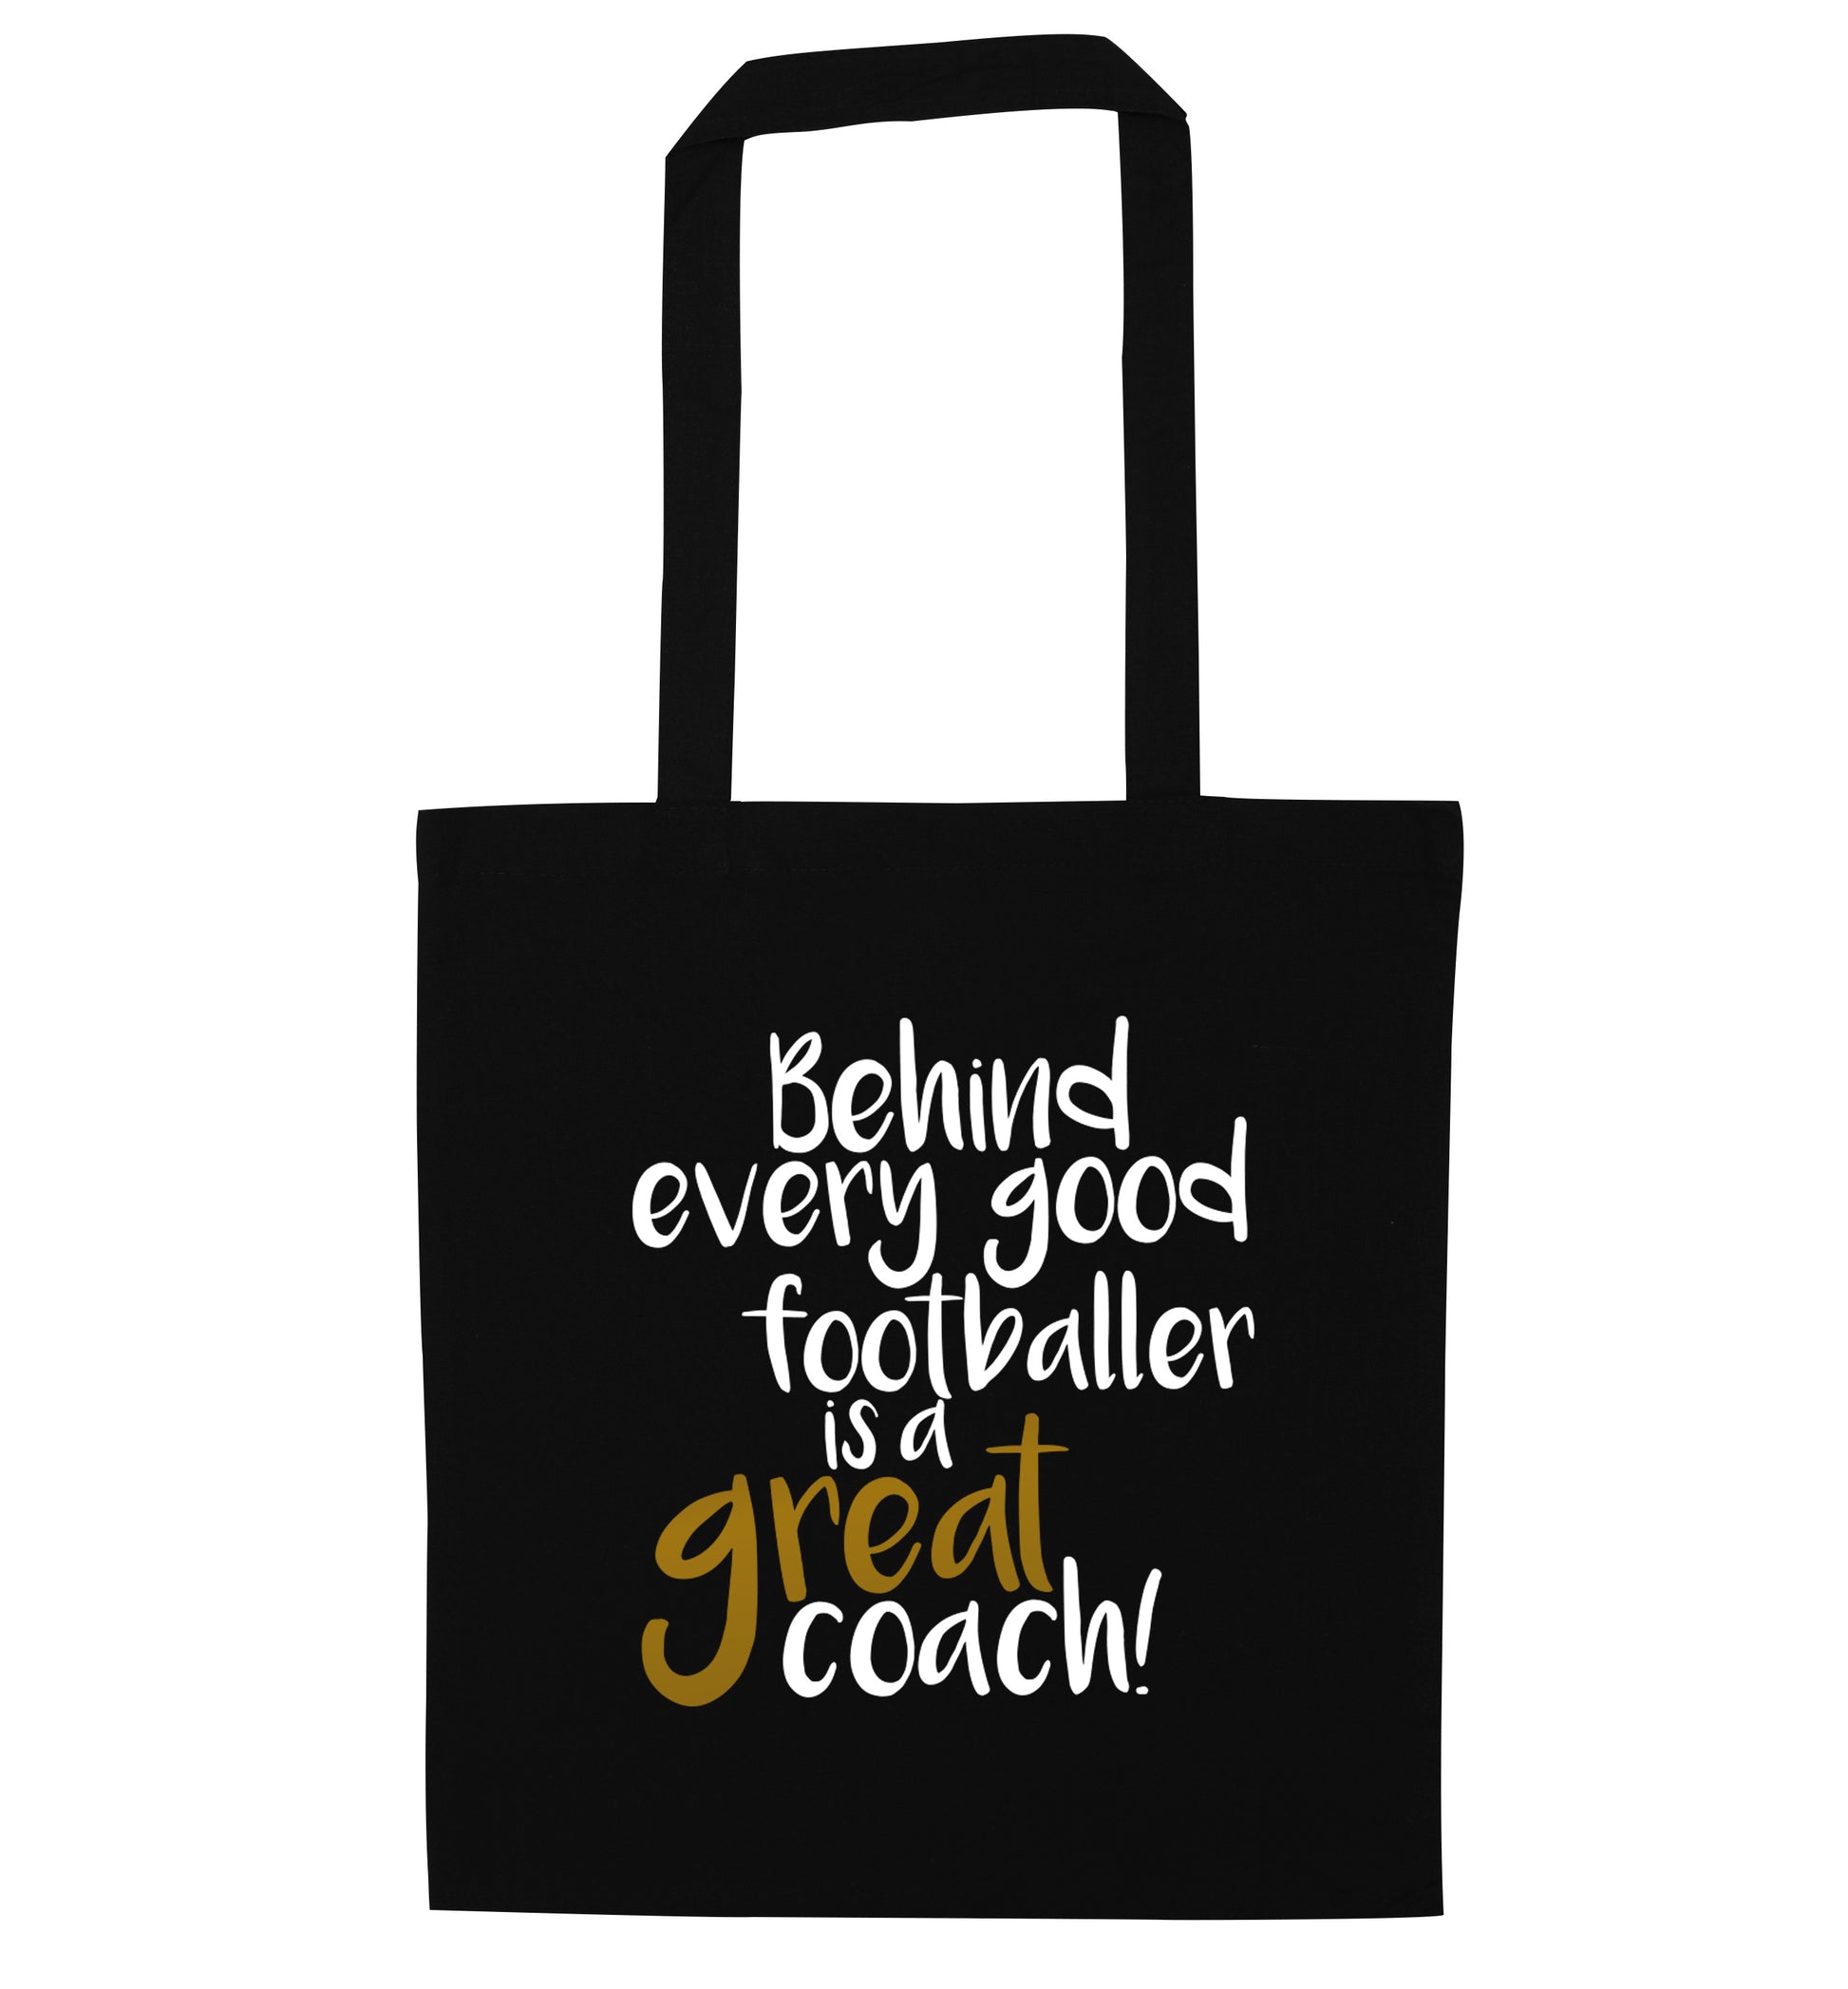 Behind every good footballer is a great coach! black tote bag